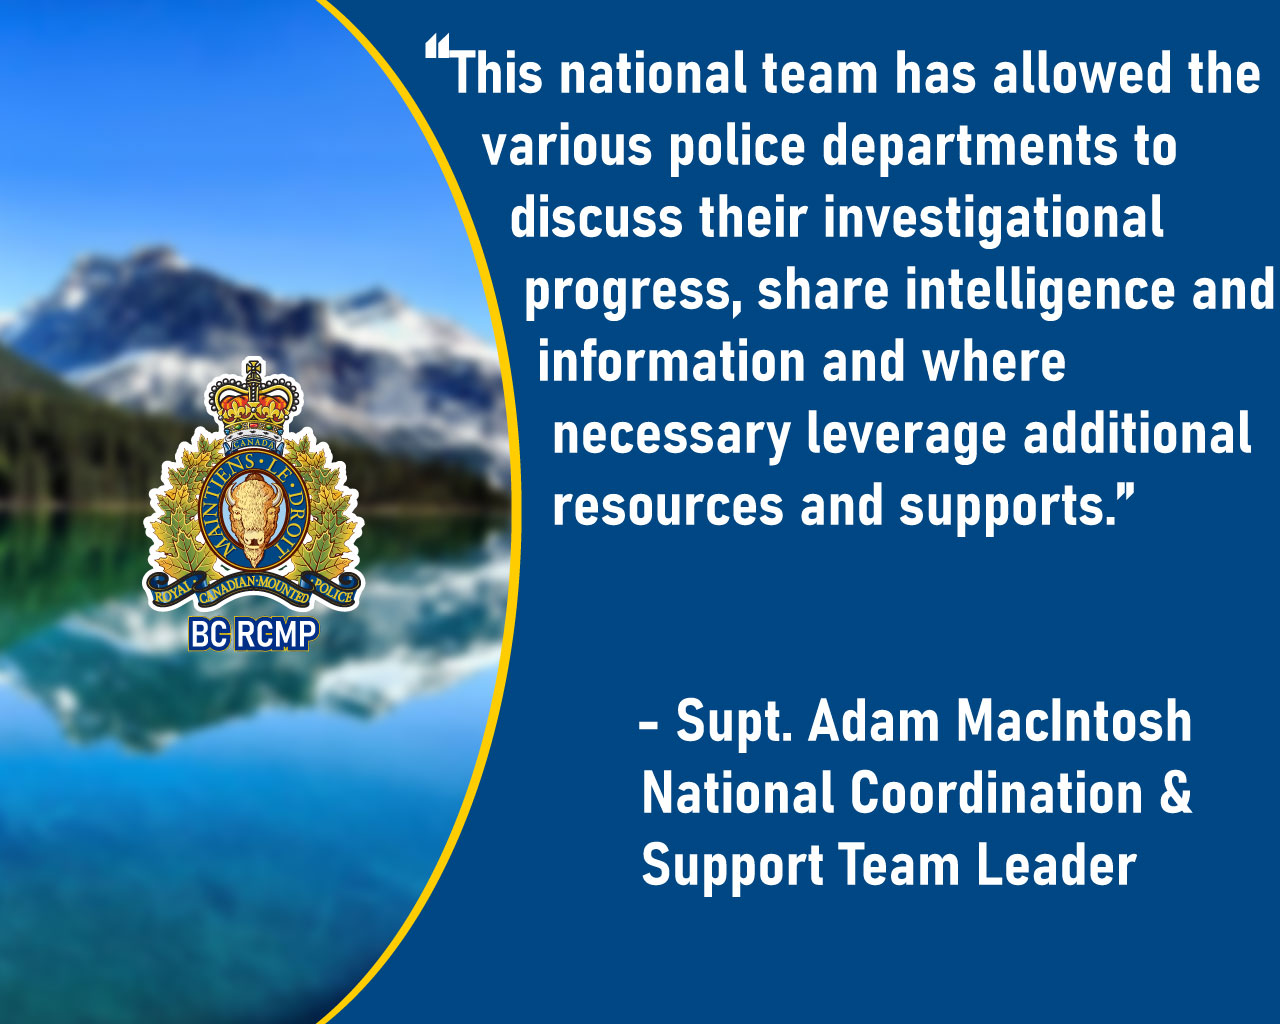 Quote from Supt. Macintosh - This national team has allowed the various police departments to discuss their investigational progress, share intelligence and information and where necessary leverage additional resources and supports